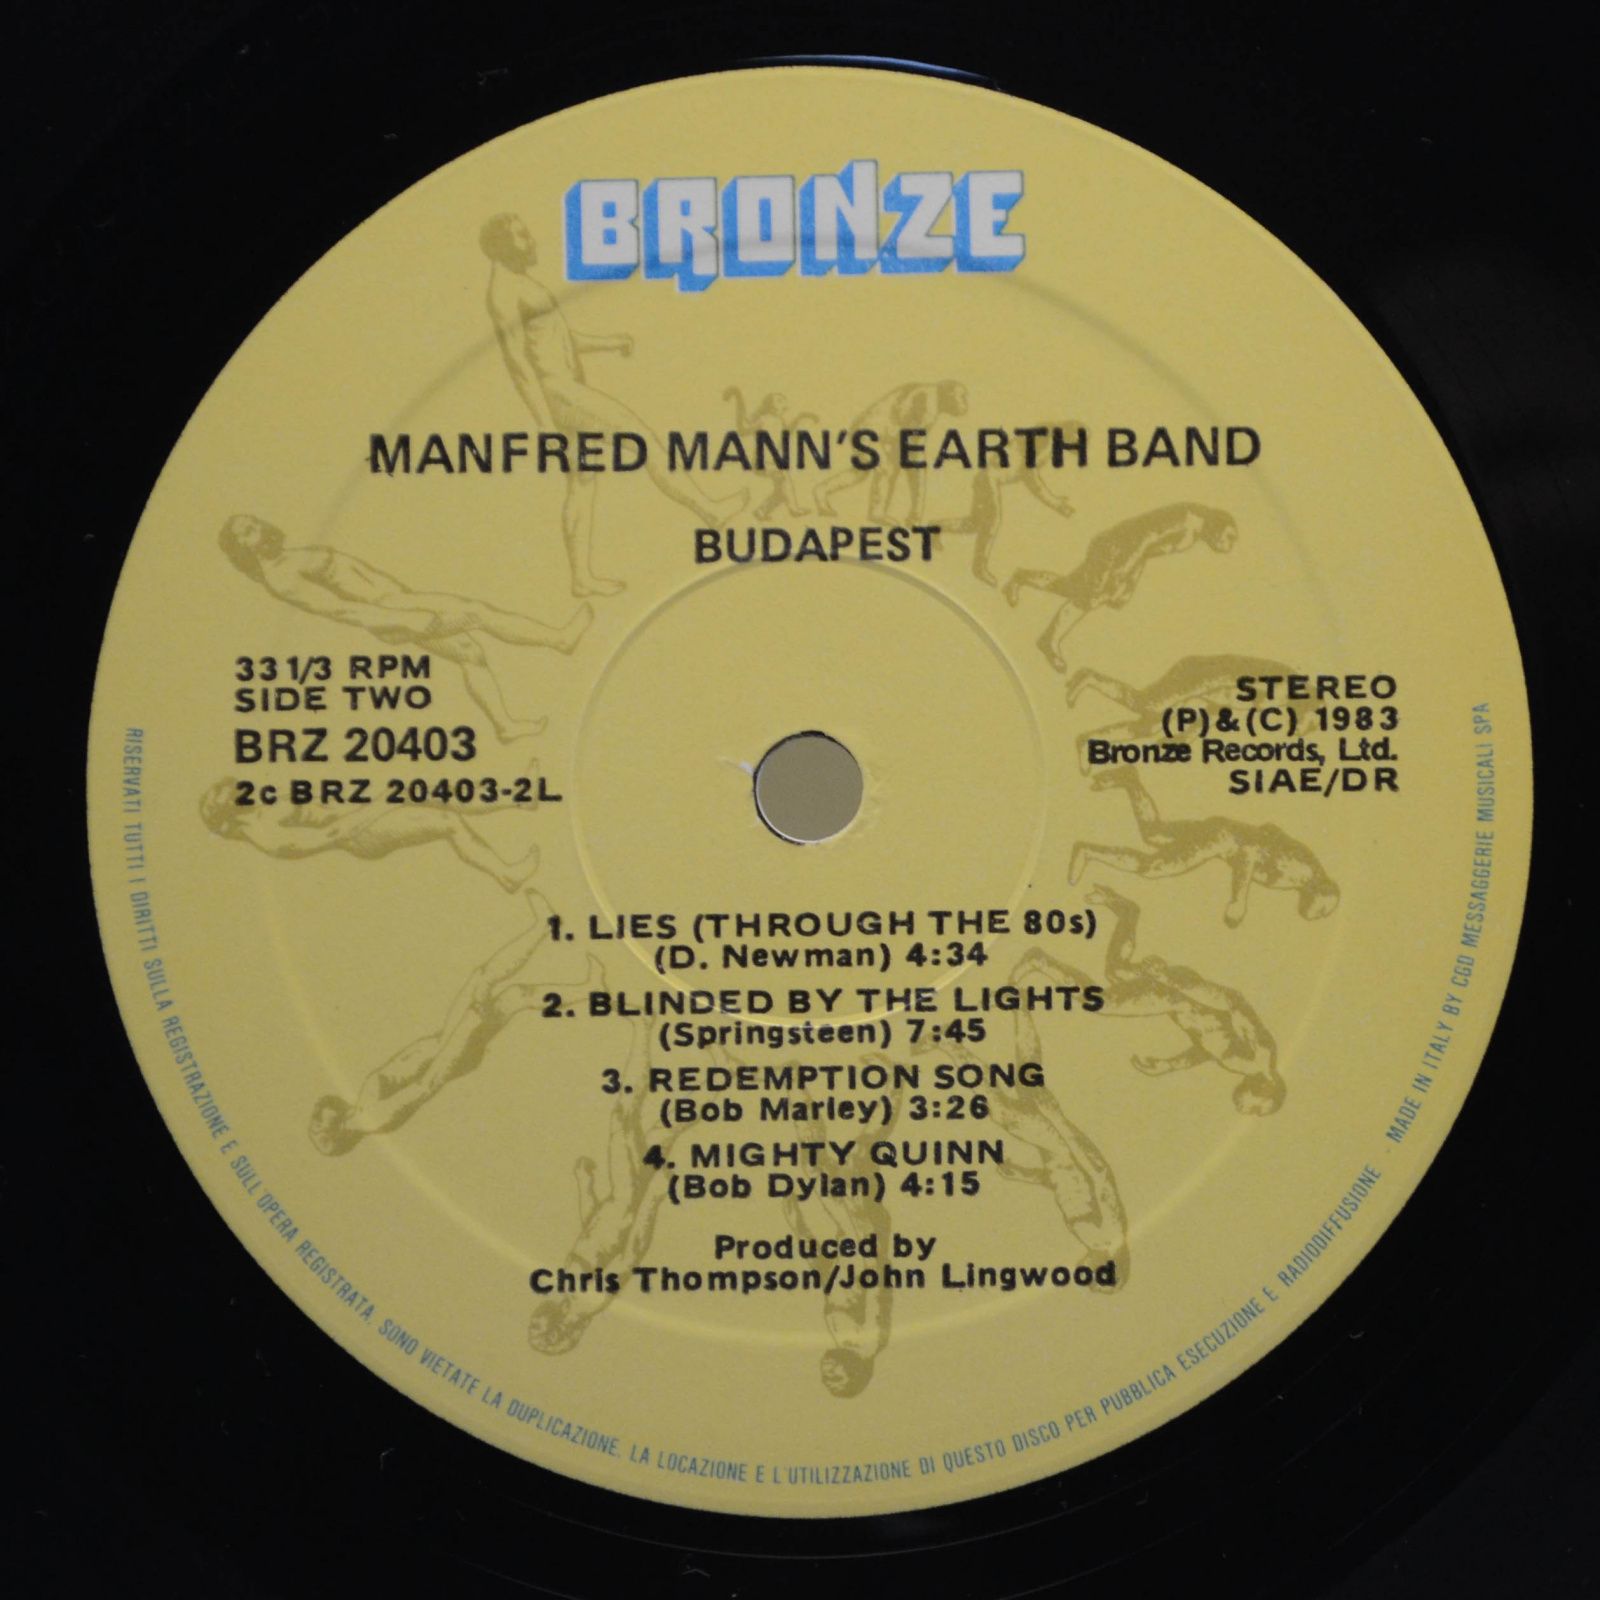 Manfred Mann's Earth Band — Budapest (Live), 1984